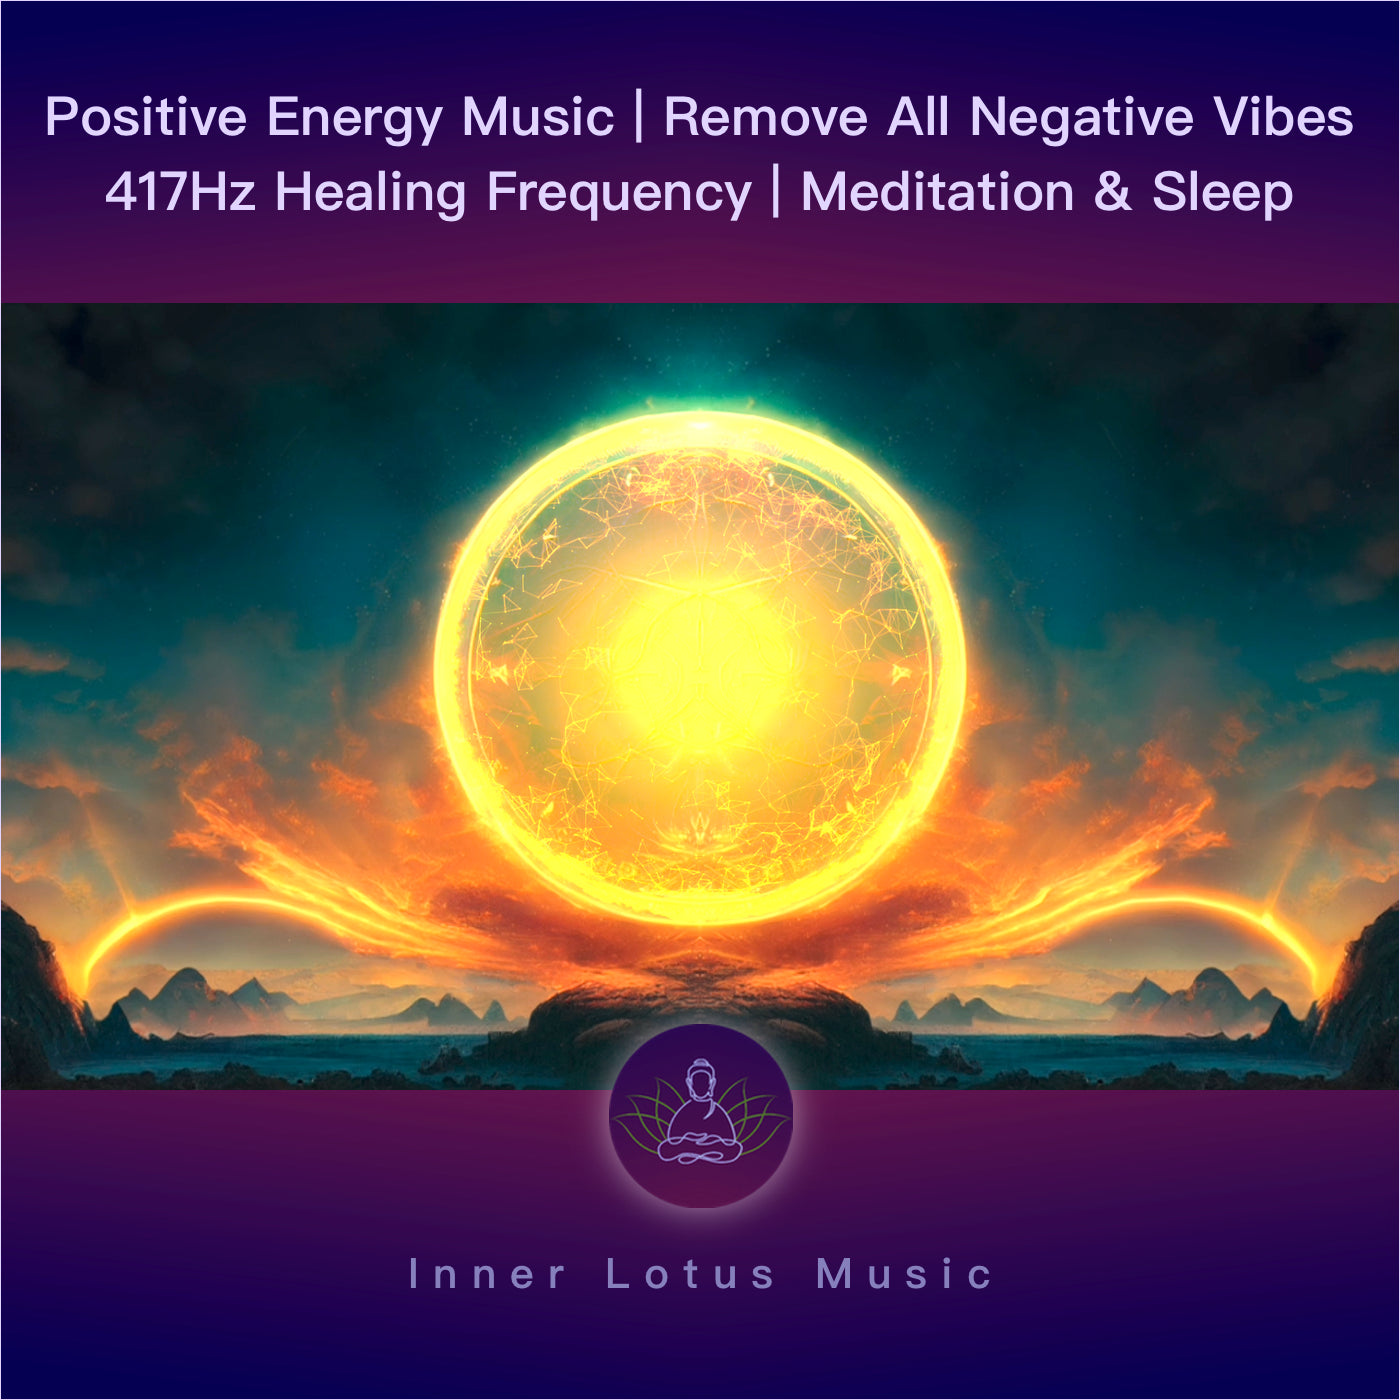 Positive Energy Music | Remove All Negative Vibes | 417Hz Healing Frequency | Meditation & Sleep